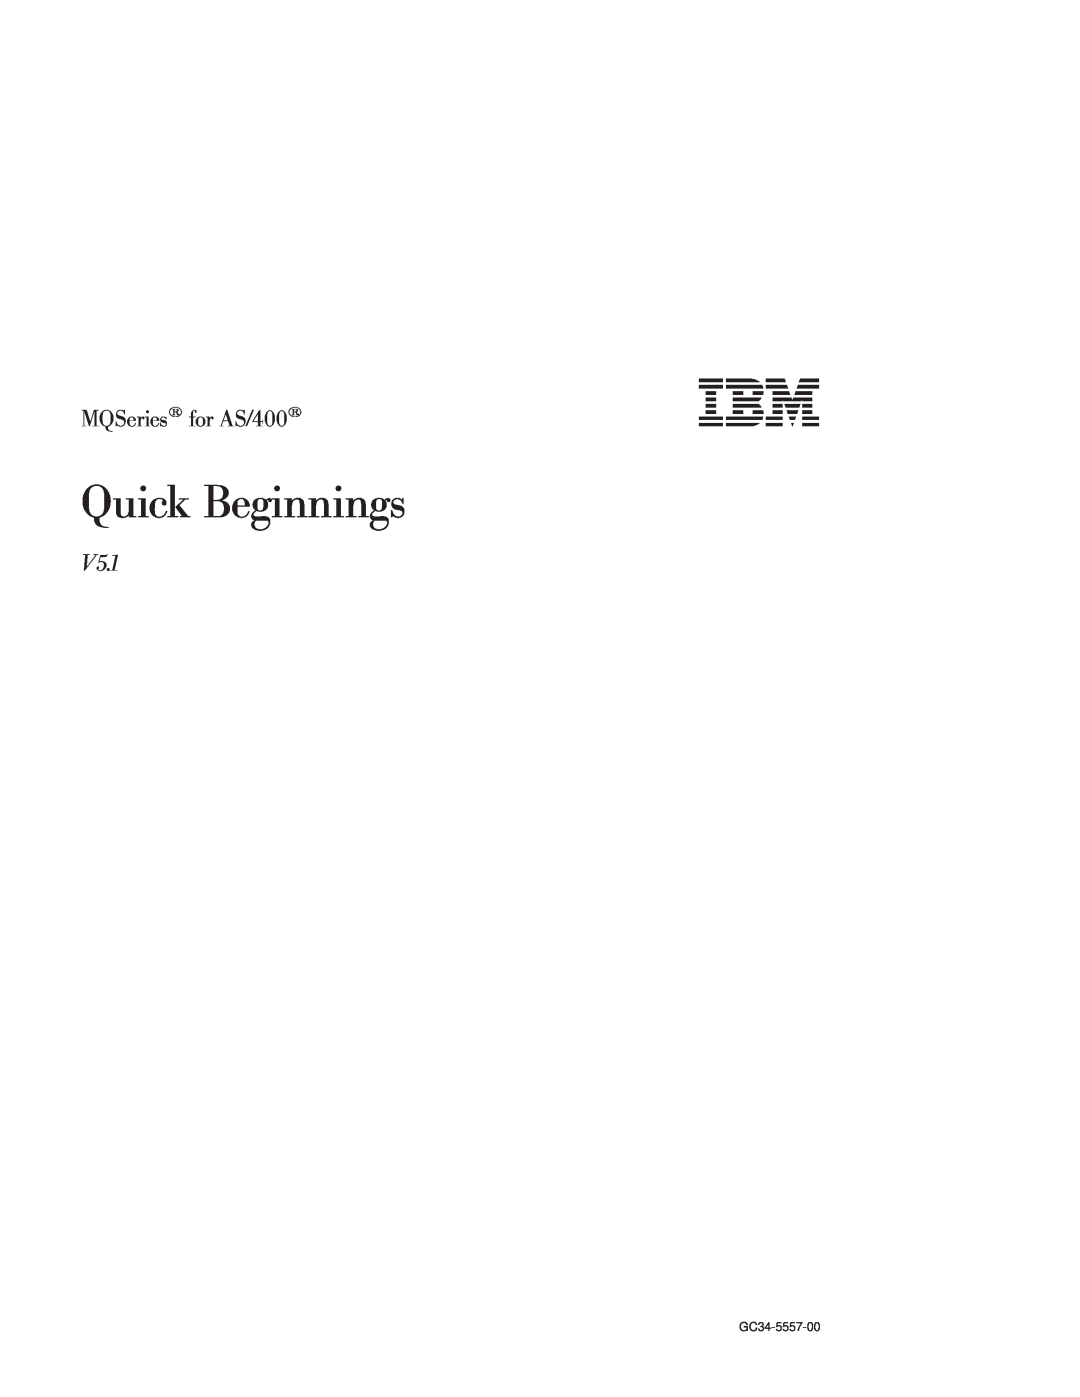 IBM GC34-5557-00 manual Quick Beginnings, MQSeries for AS/400, V5.1 